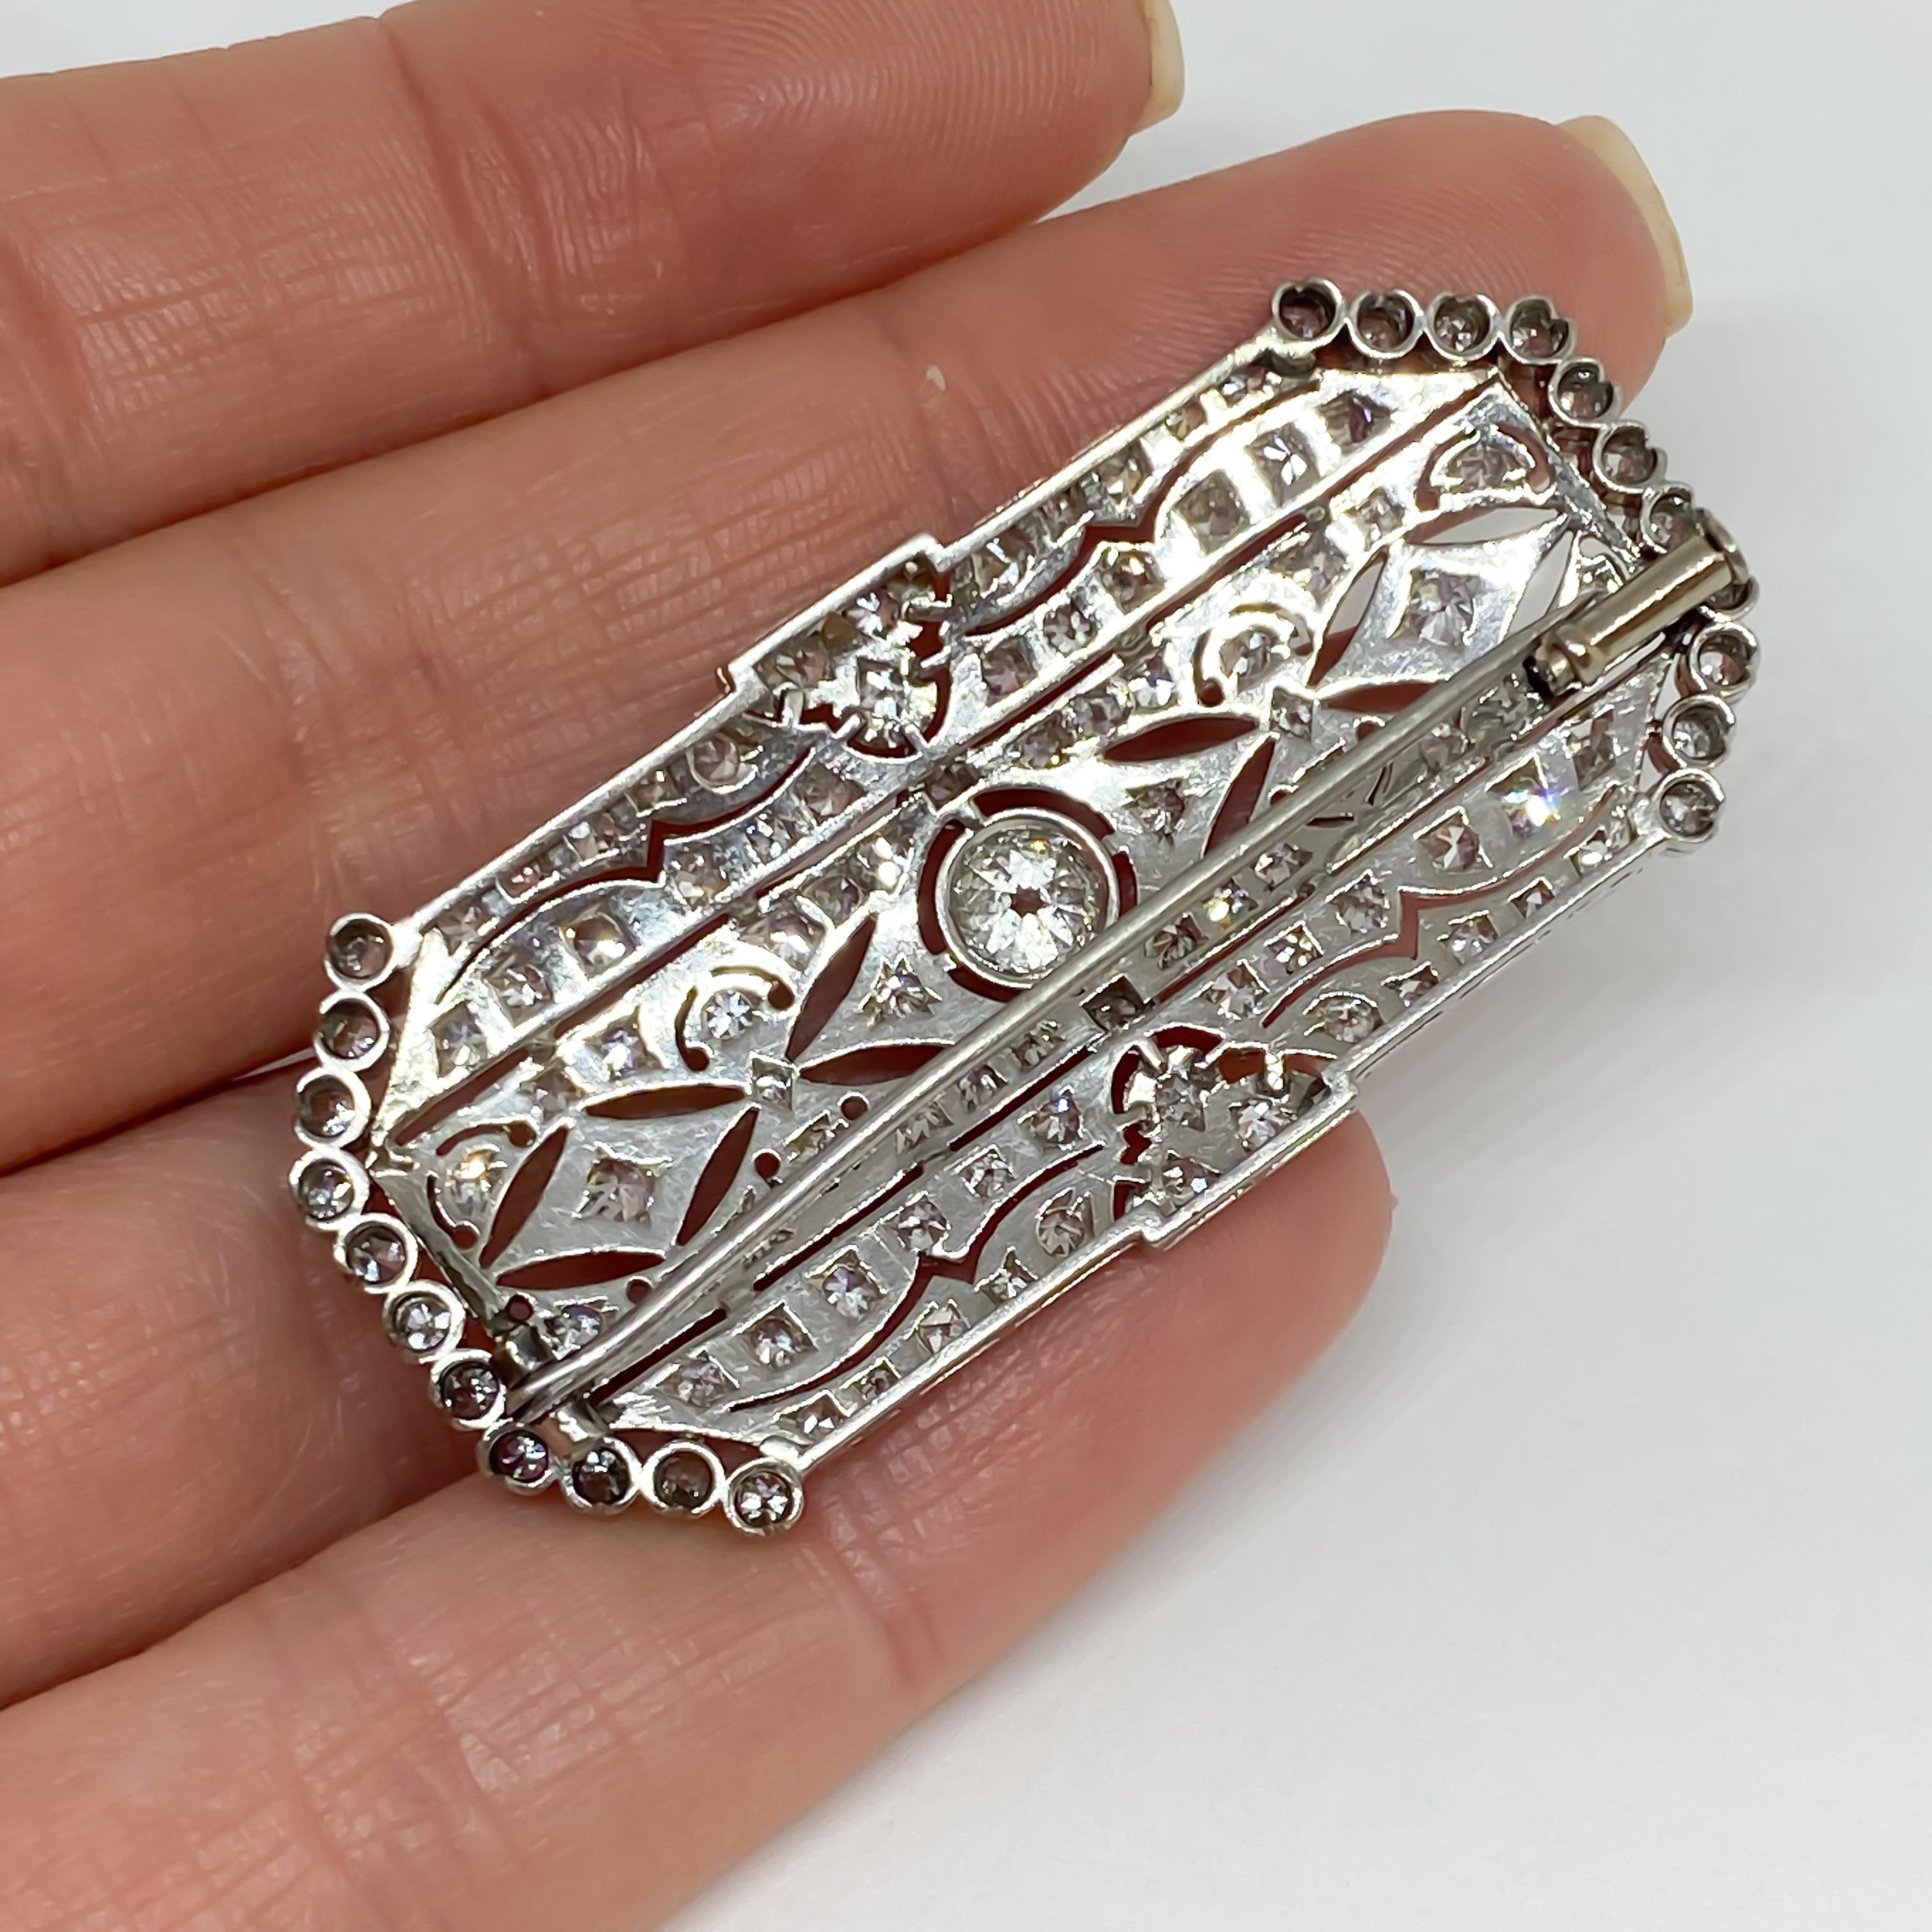 Antique Edwardian Filigree Platinum Diamond Brooch 3.70 Carat In Excellent Condition For Sale In Carmel-by-the-Sea, CA